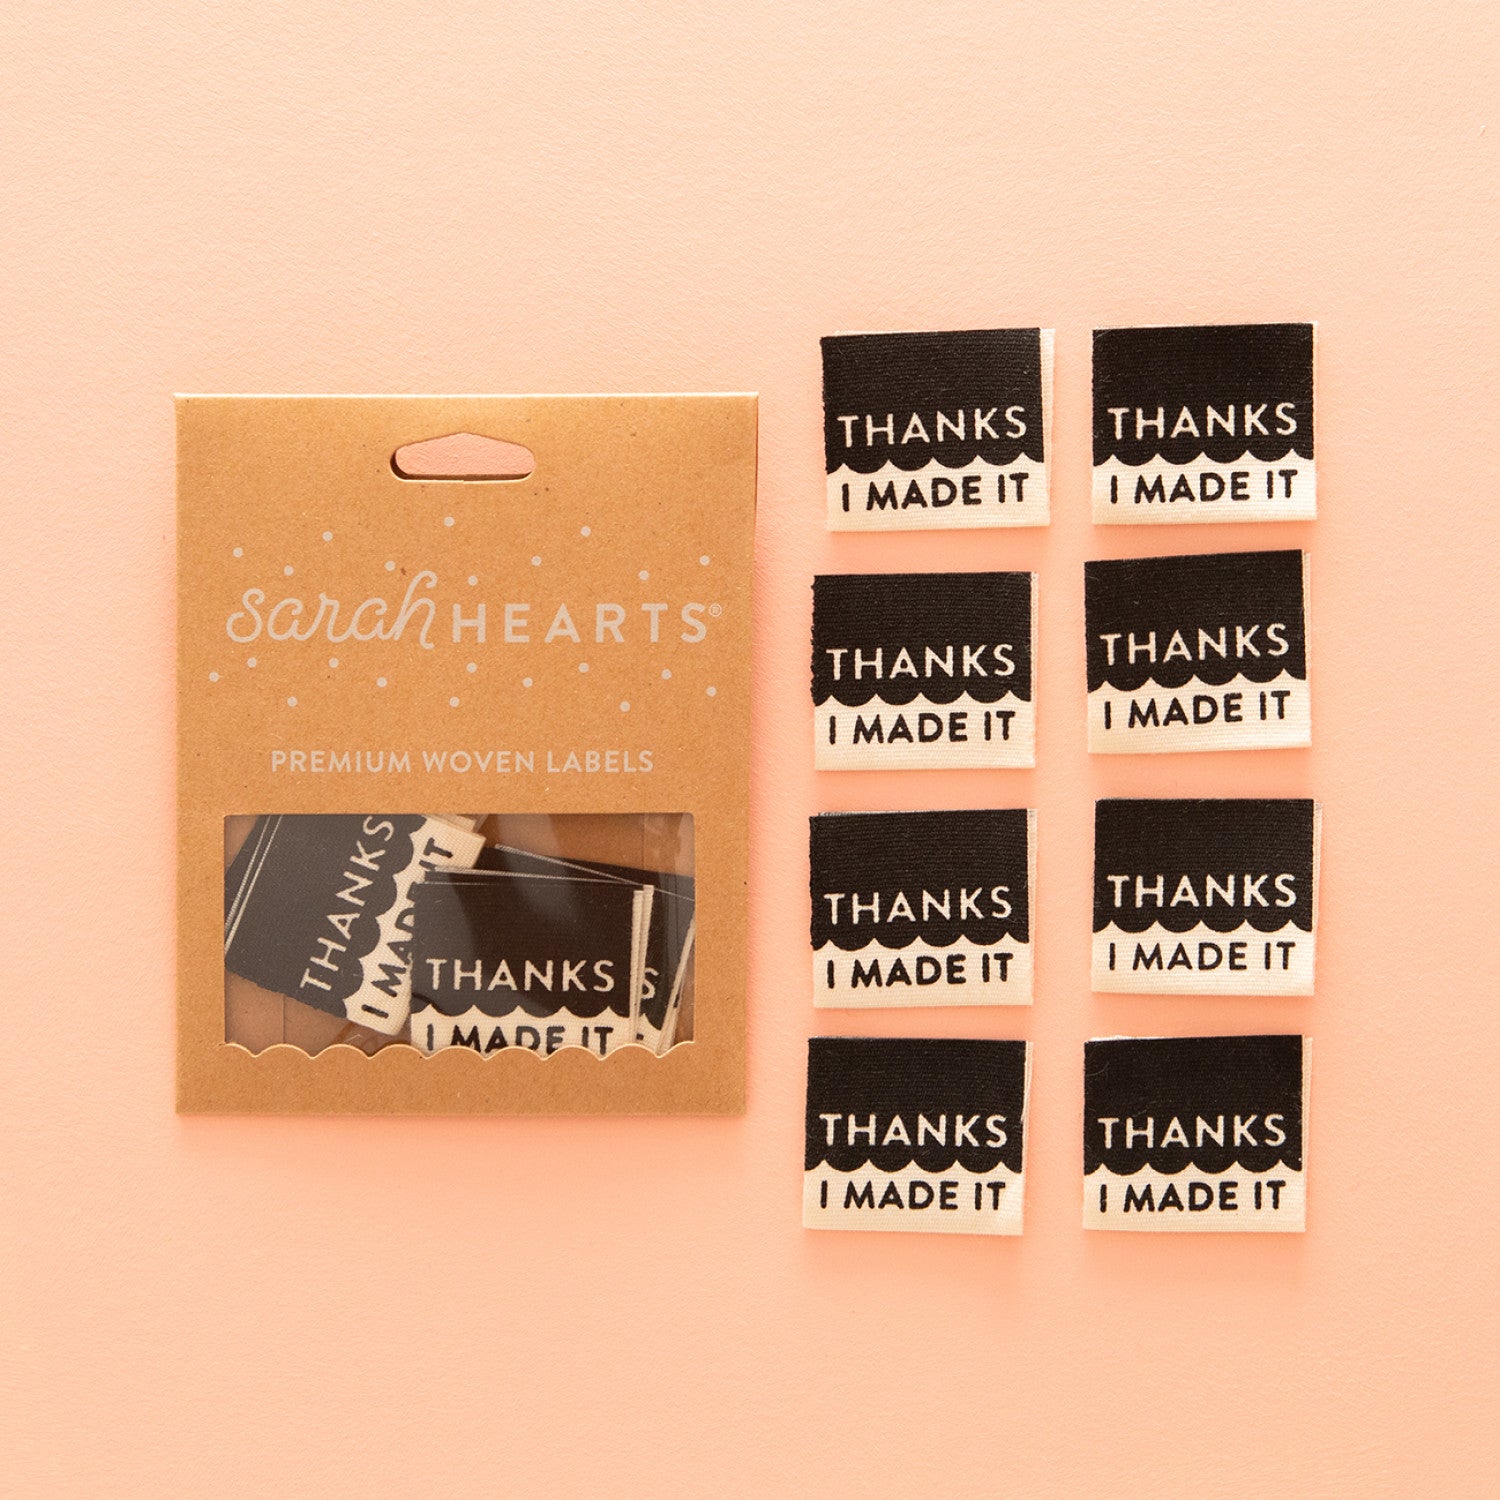 THANKS I MADE IT Organic Cotton Label 8-Pack from Sarah Hearts